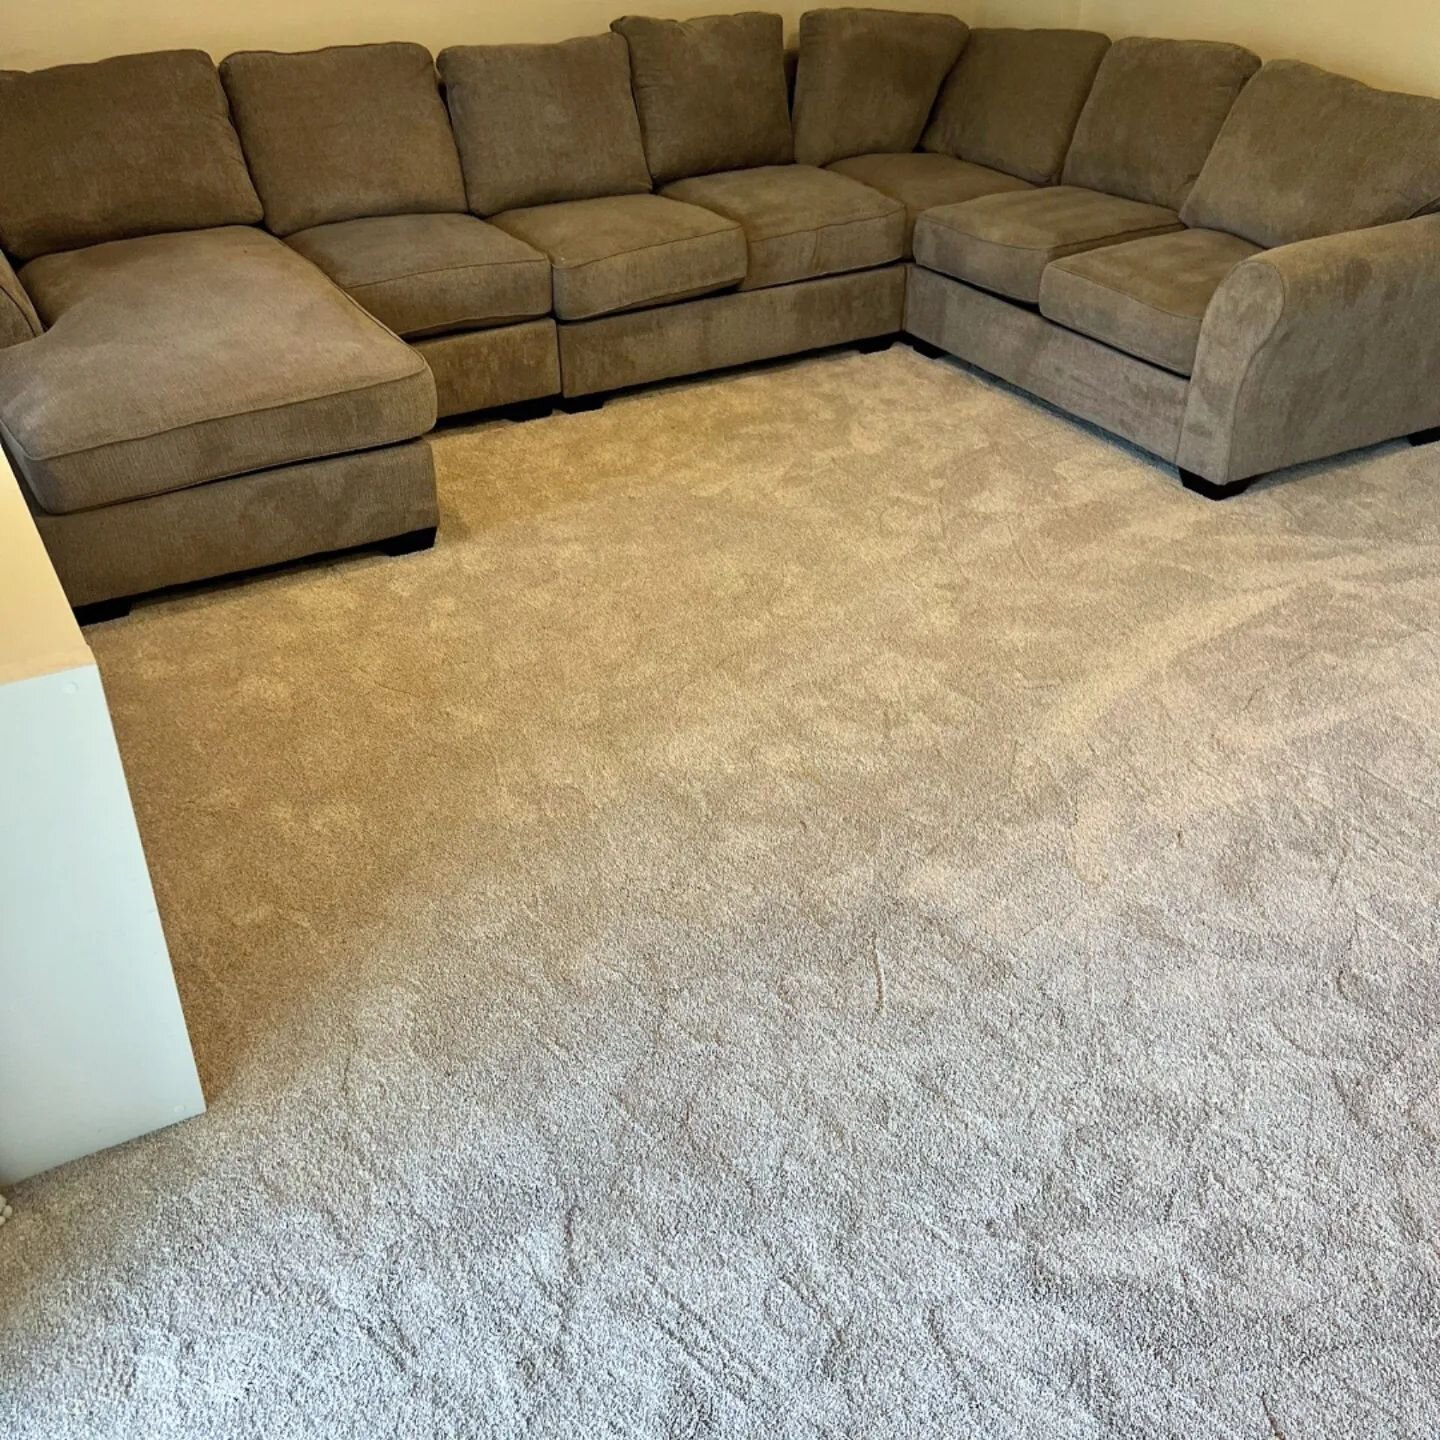 Sometimes even the simplest of changes makes a space feel refreshed ✨️

Swipe through to see the before 👉

#flooring #flooringexperts #carpet #carpetinstallation #residentialinteriors #contractor #kreerconstruction #home #flooringideas #homeimprovem